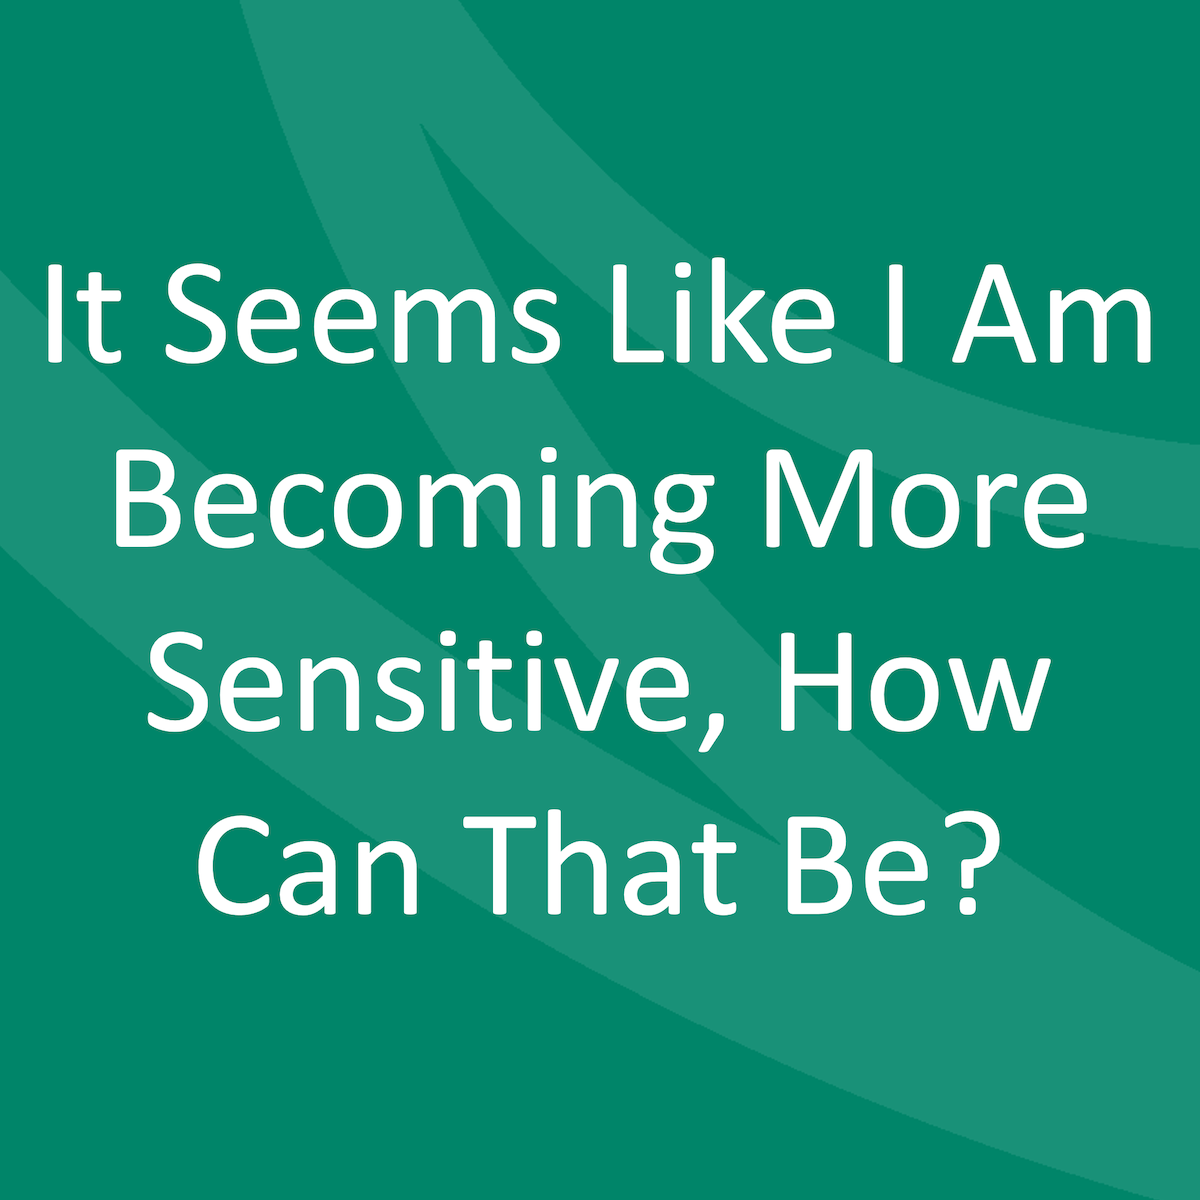 It Seems Like I Am Becoming More Sensitive, How Can That Be?